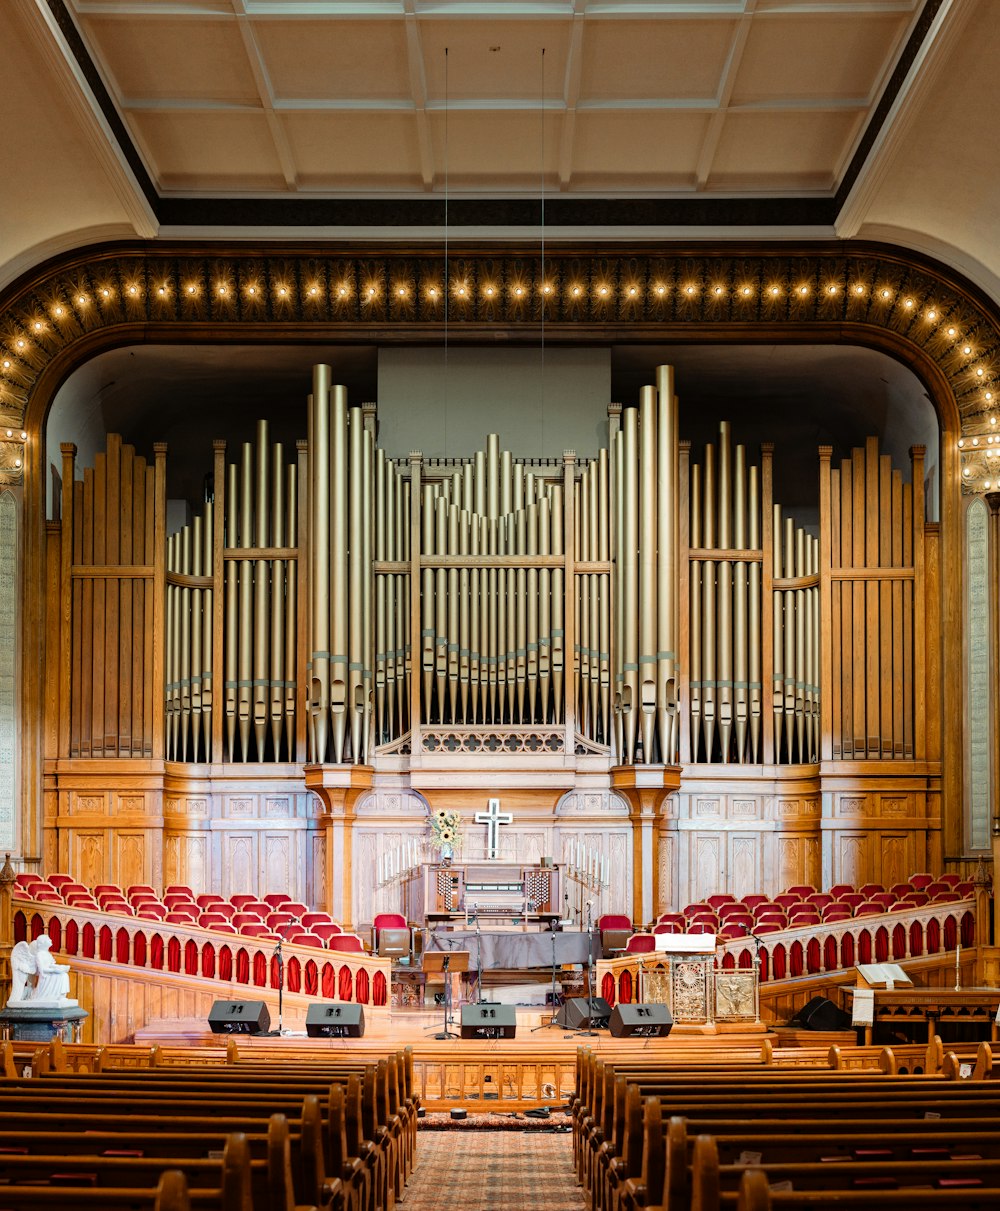 a large pipe organ in a church with red seats